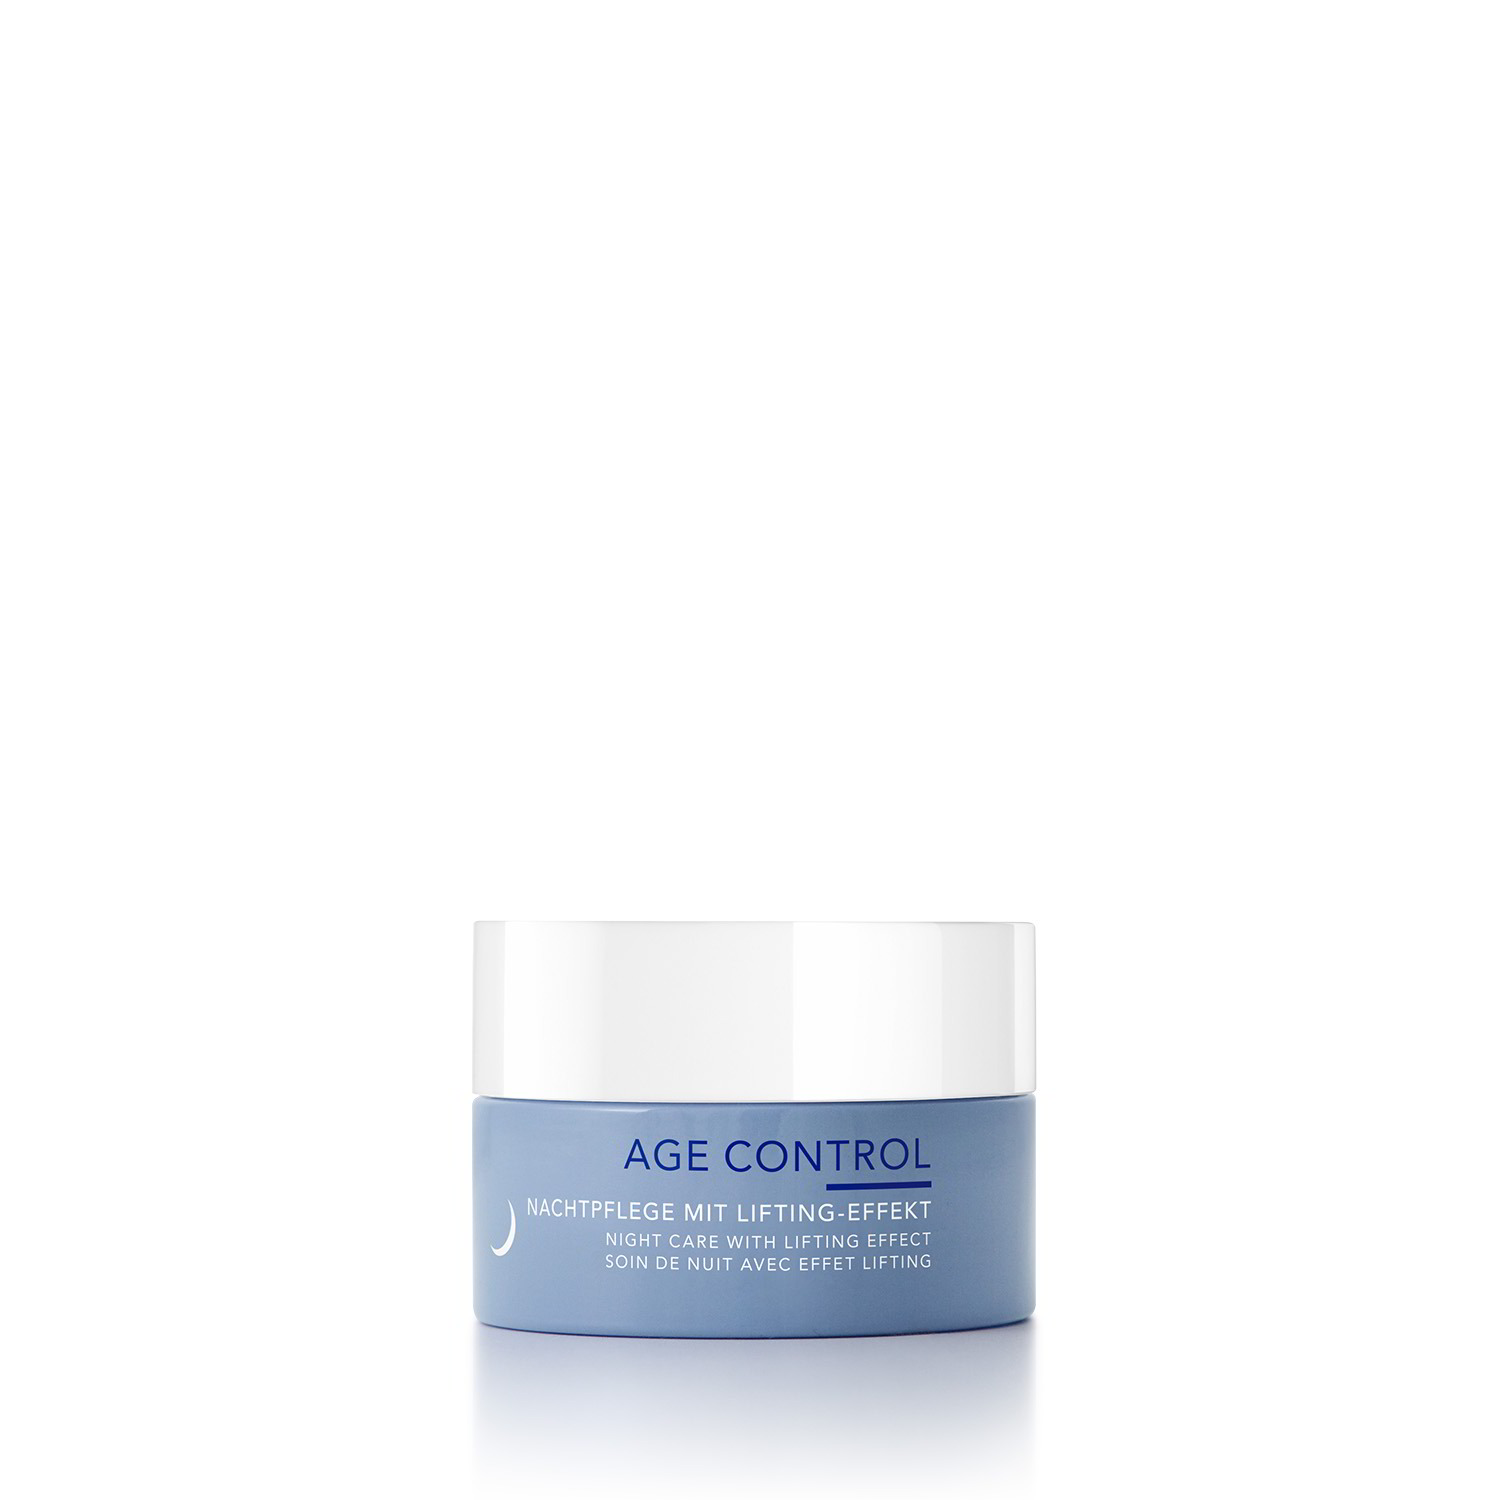 Age Control Night Care With Lifting Effect